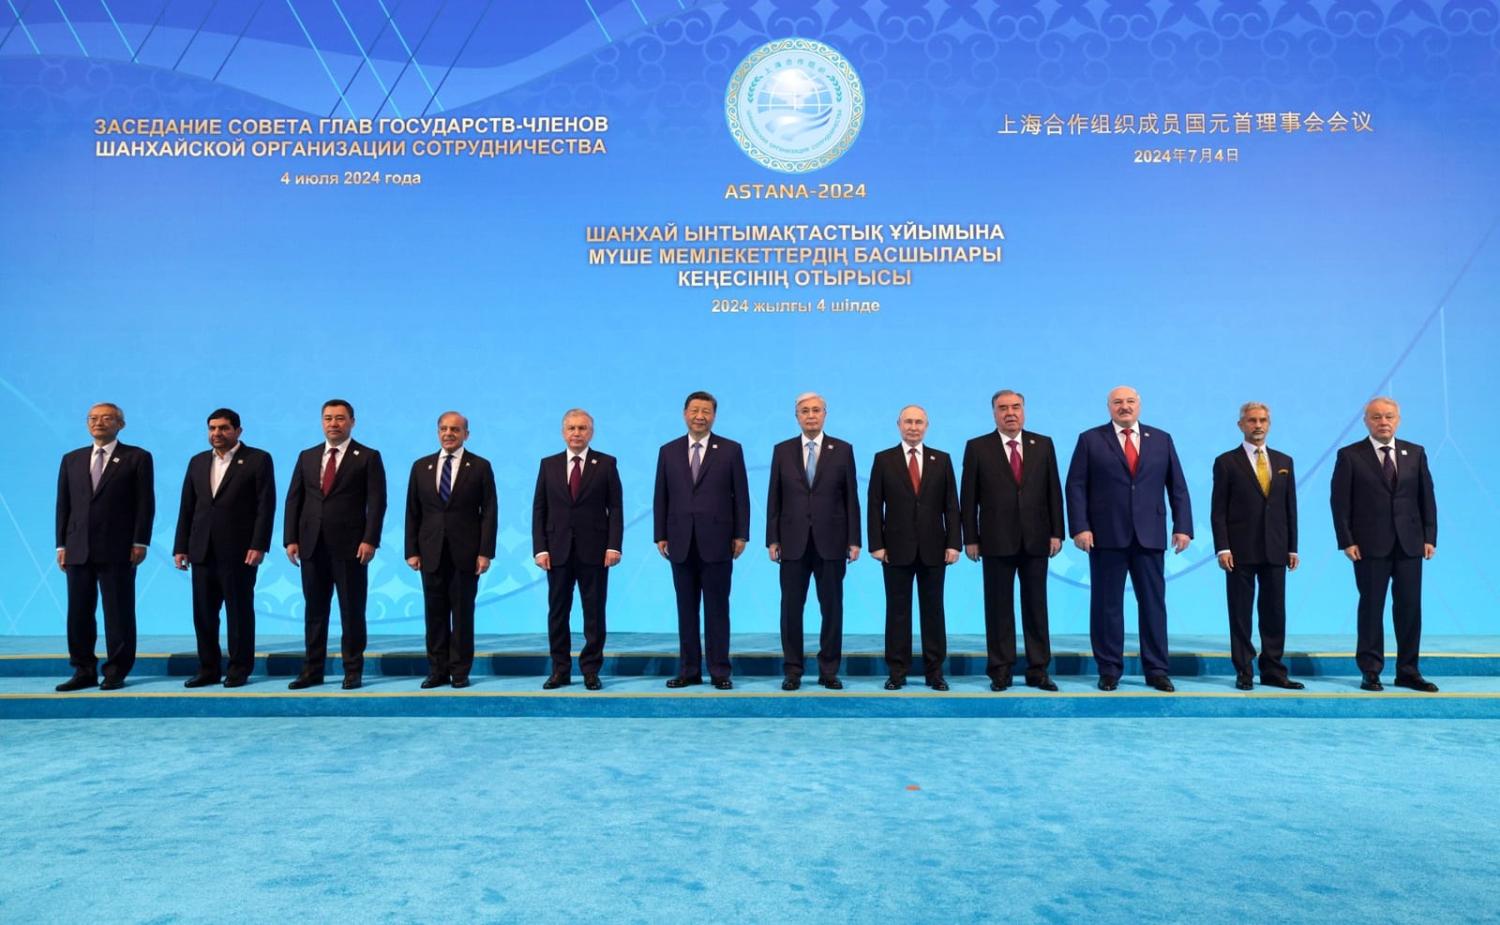 A group photo of the SCO heads of state following the 3-4 July 2024 summit in Astana (Kremlin)